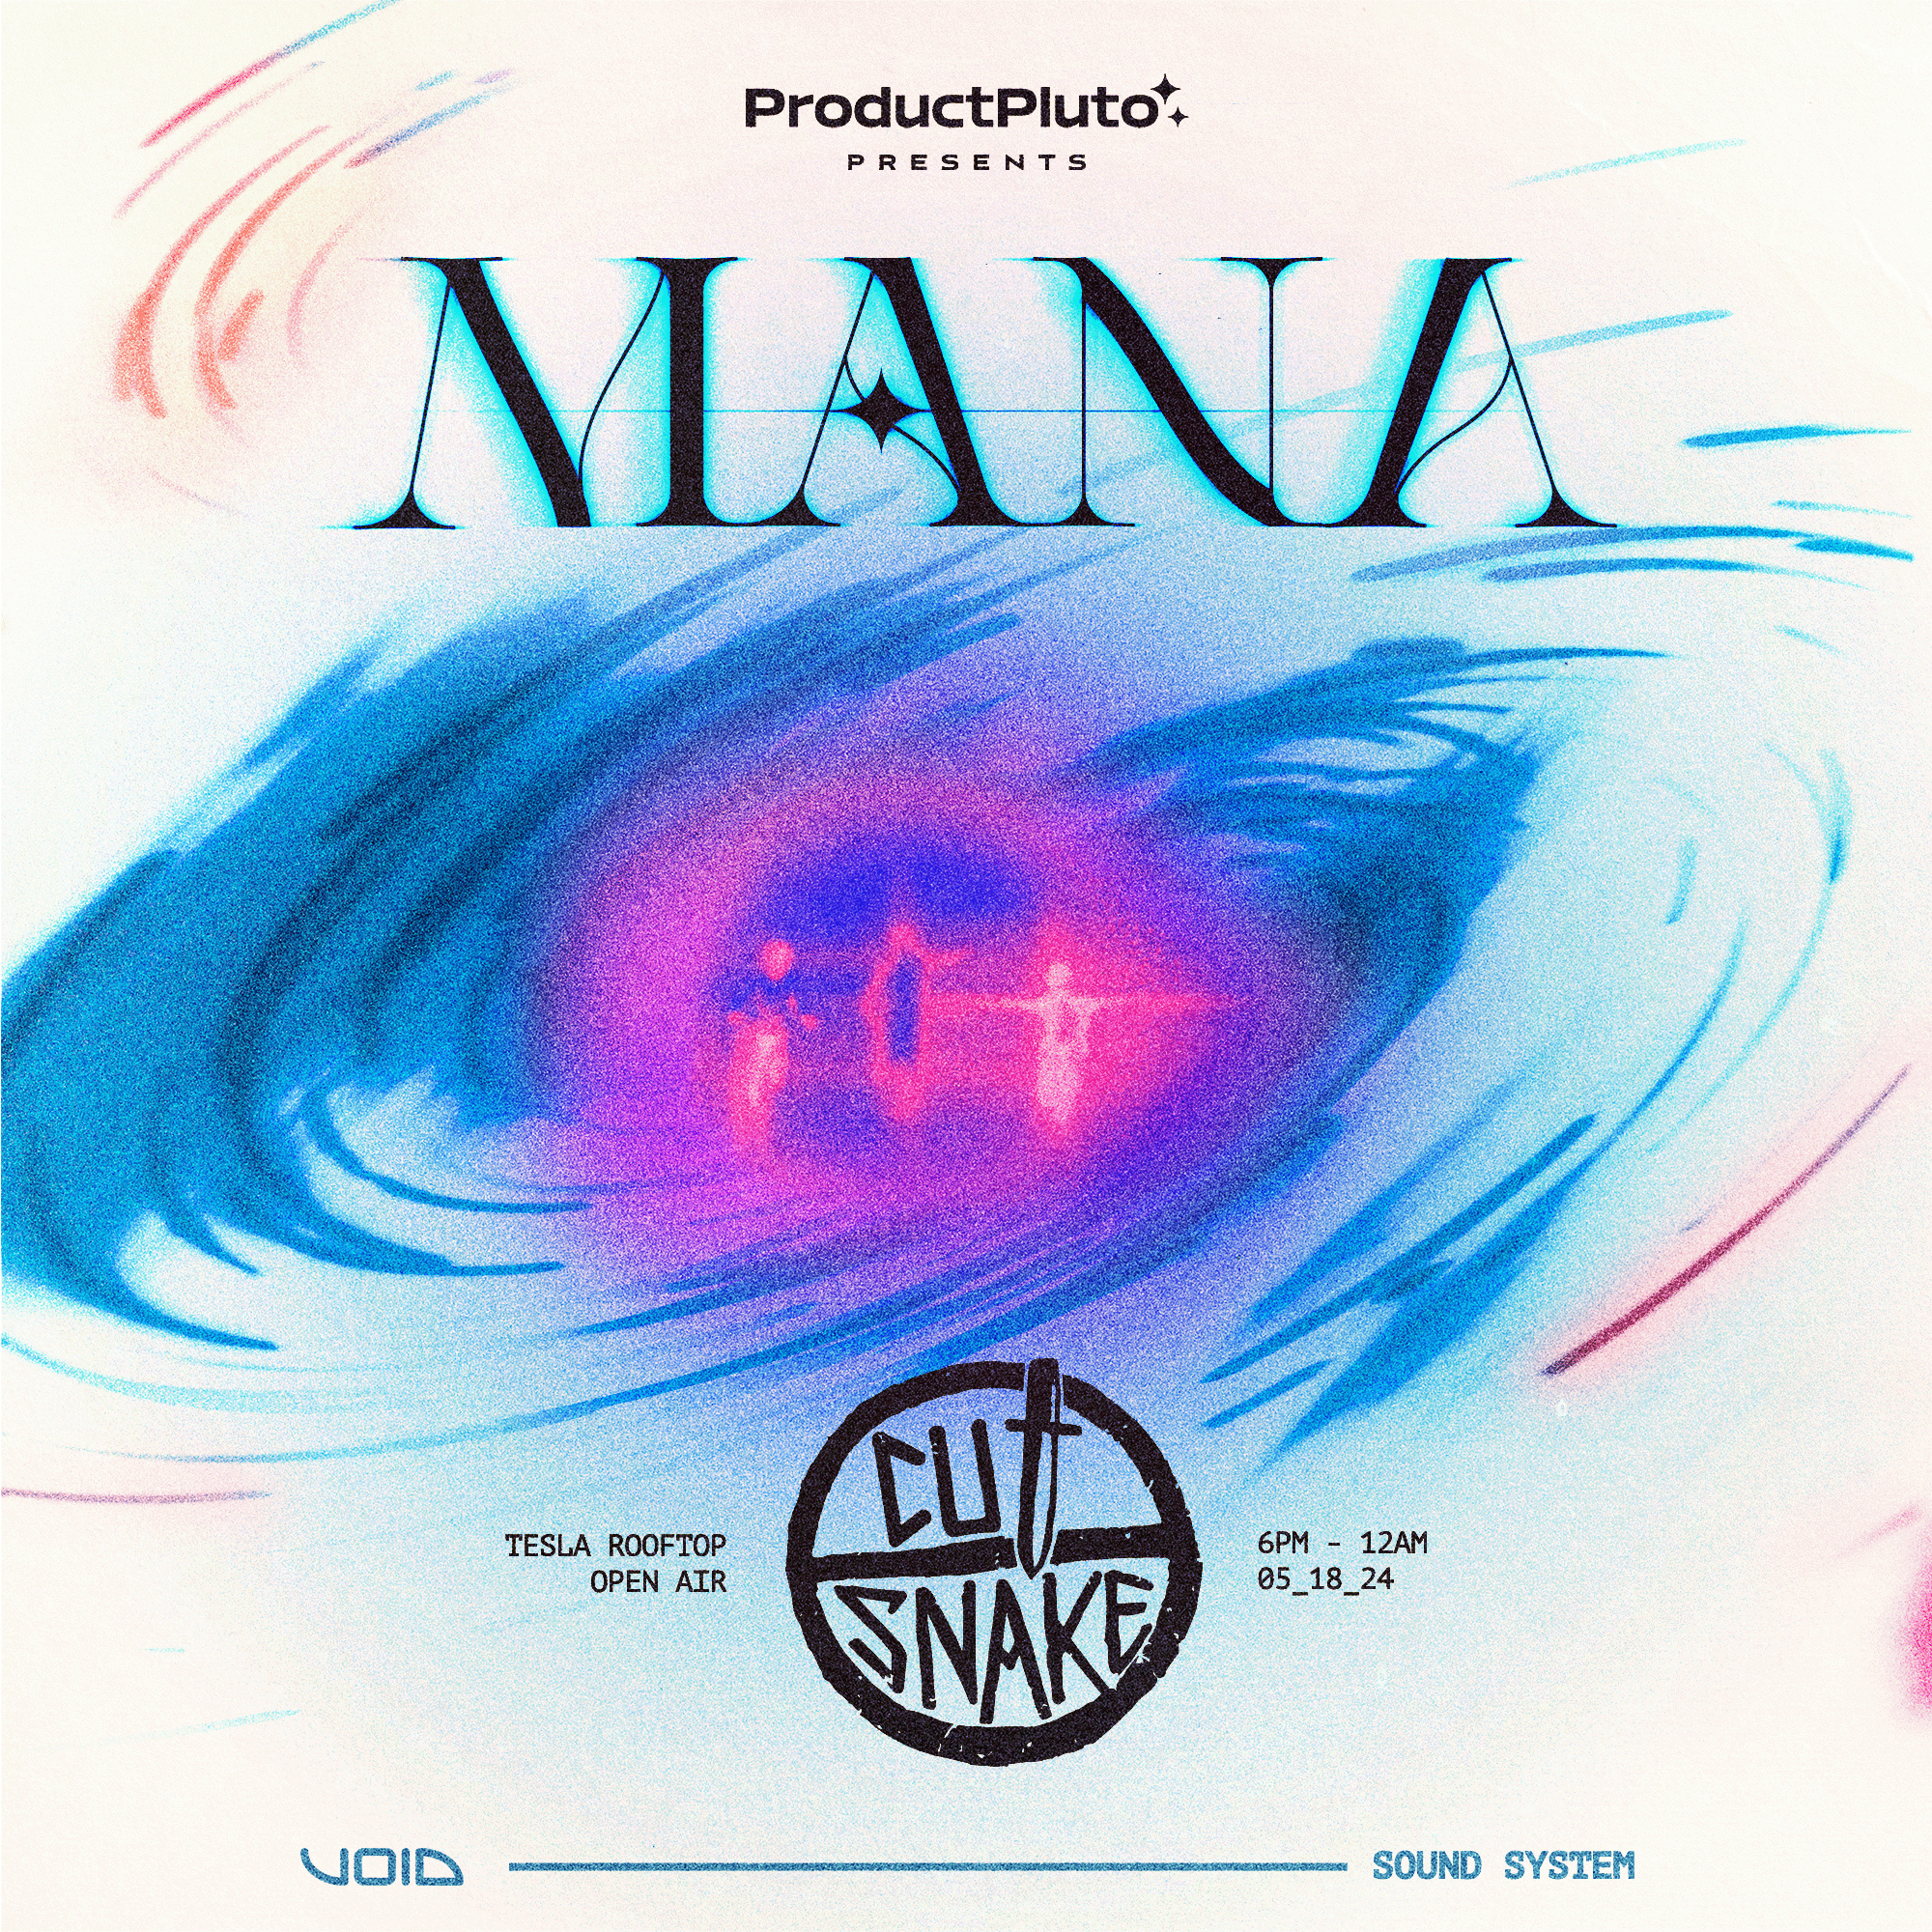 Product Pluto presents 'MANA' with Cut Snake - フライヤー表